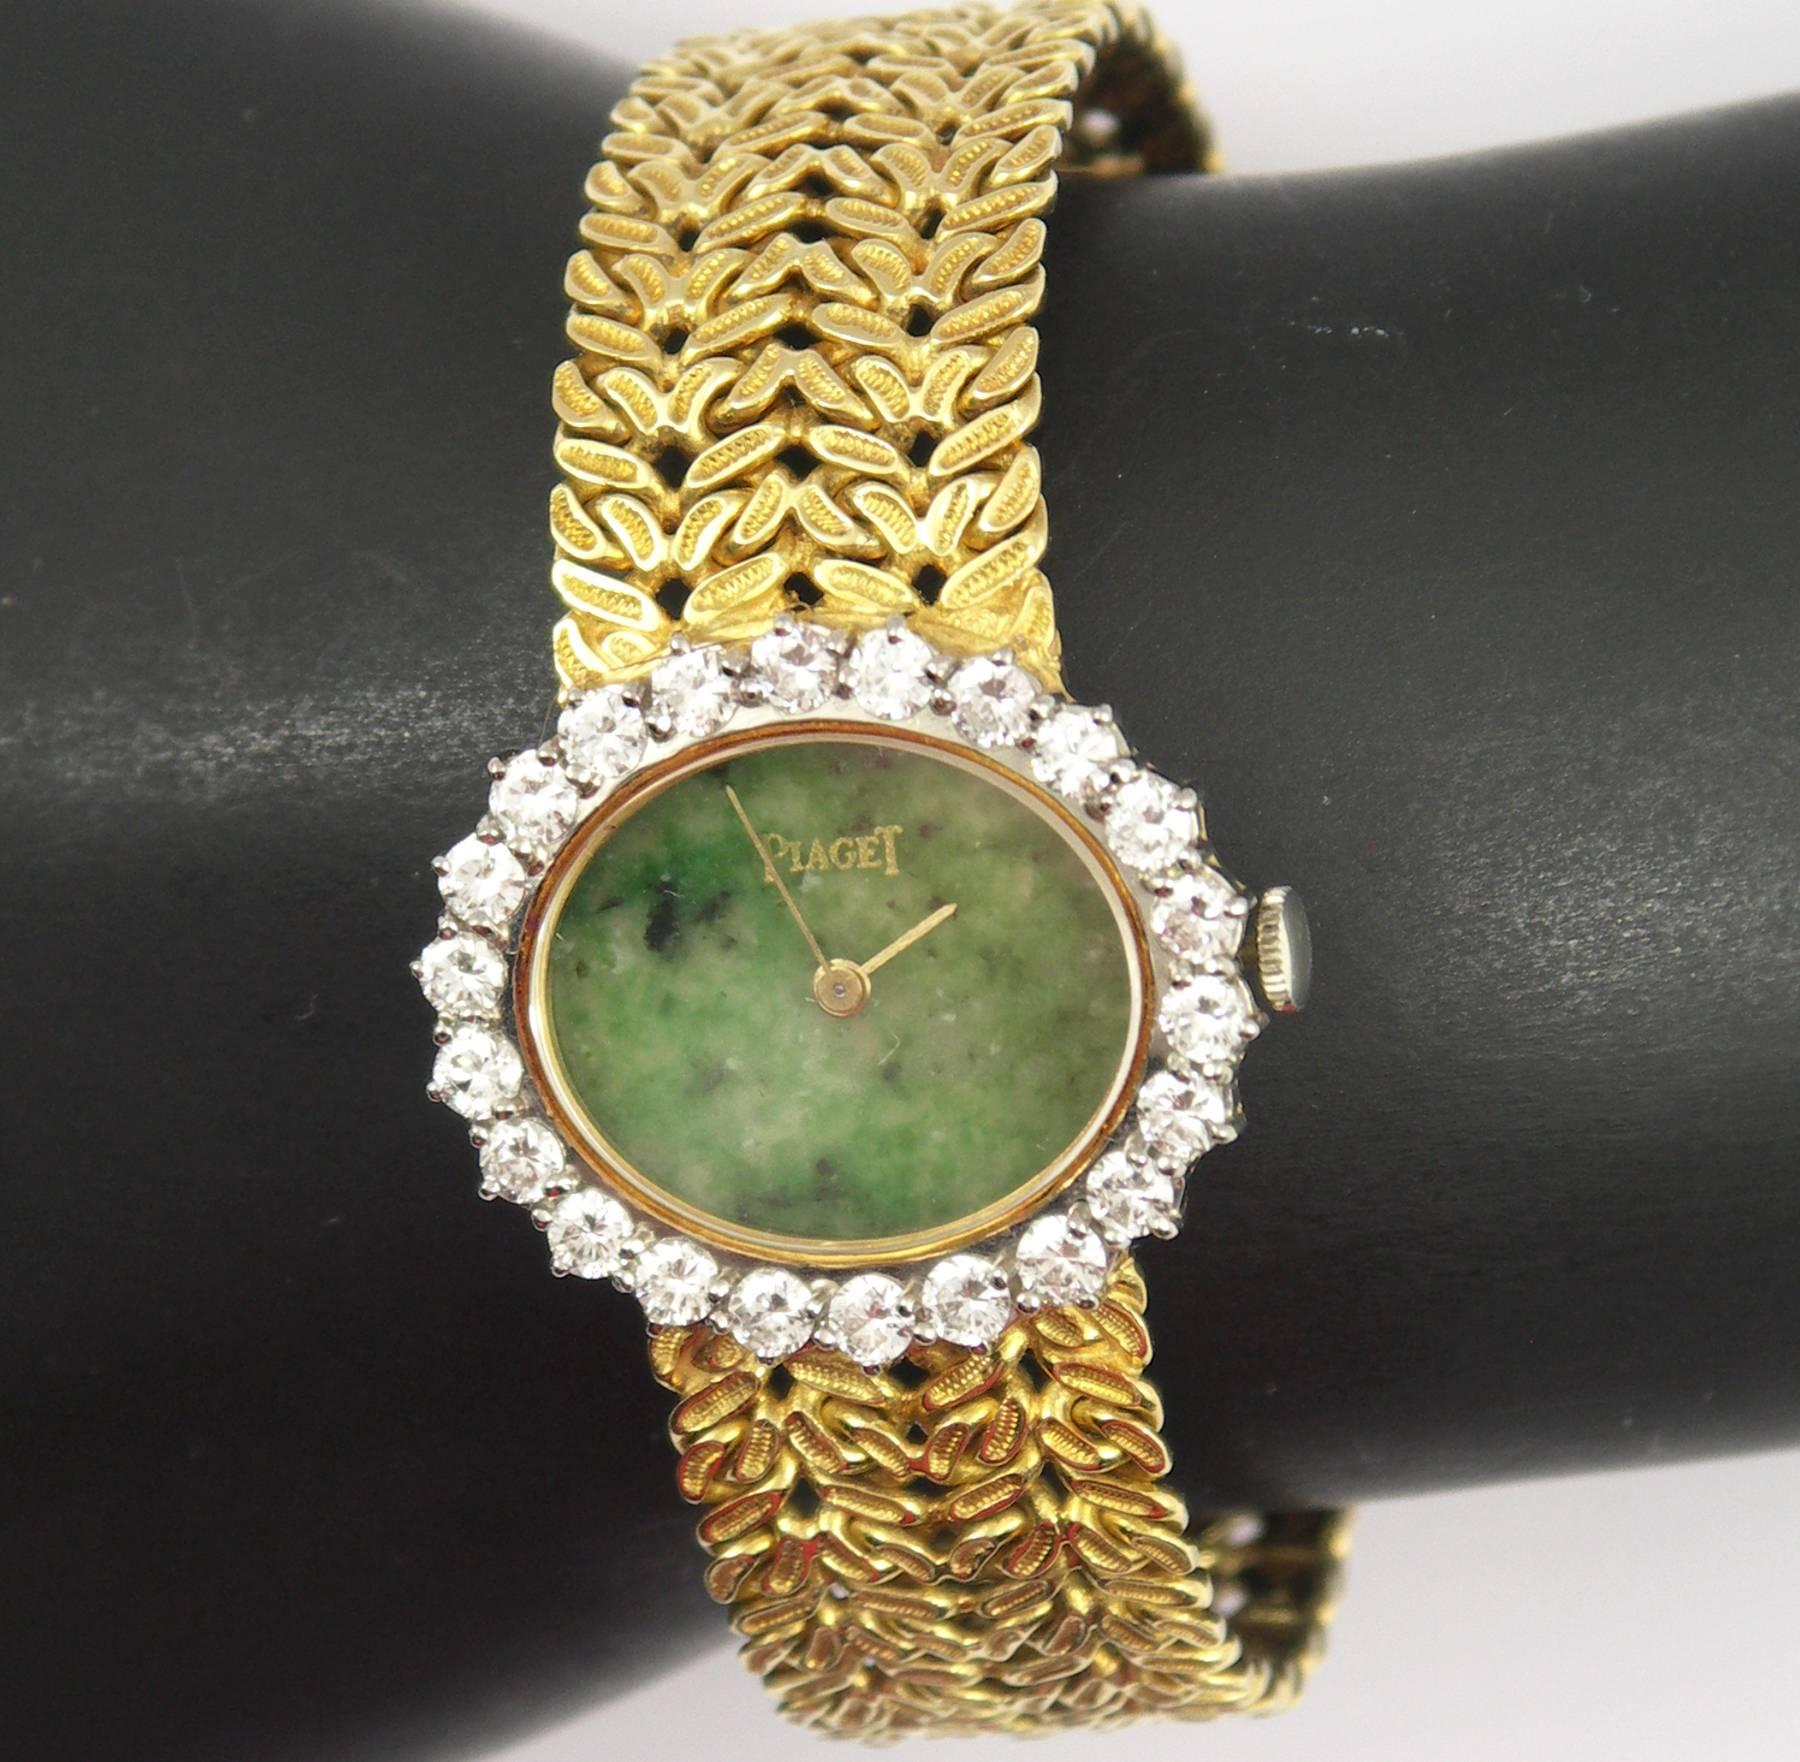 A ladies yellow gold, Piaget wristwatch with a jade dial measuring 17mm X 21mm. Encircling the dial are 22 round brilliant cut diamonds weighing 2.25ct total approximate weight of F color and VVS2/VS1 clarity. The overall measure of the diamond